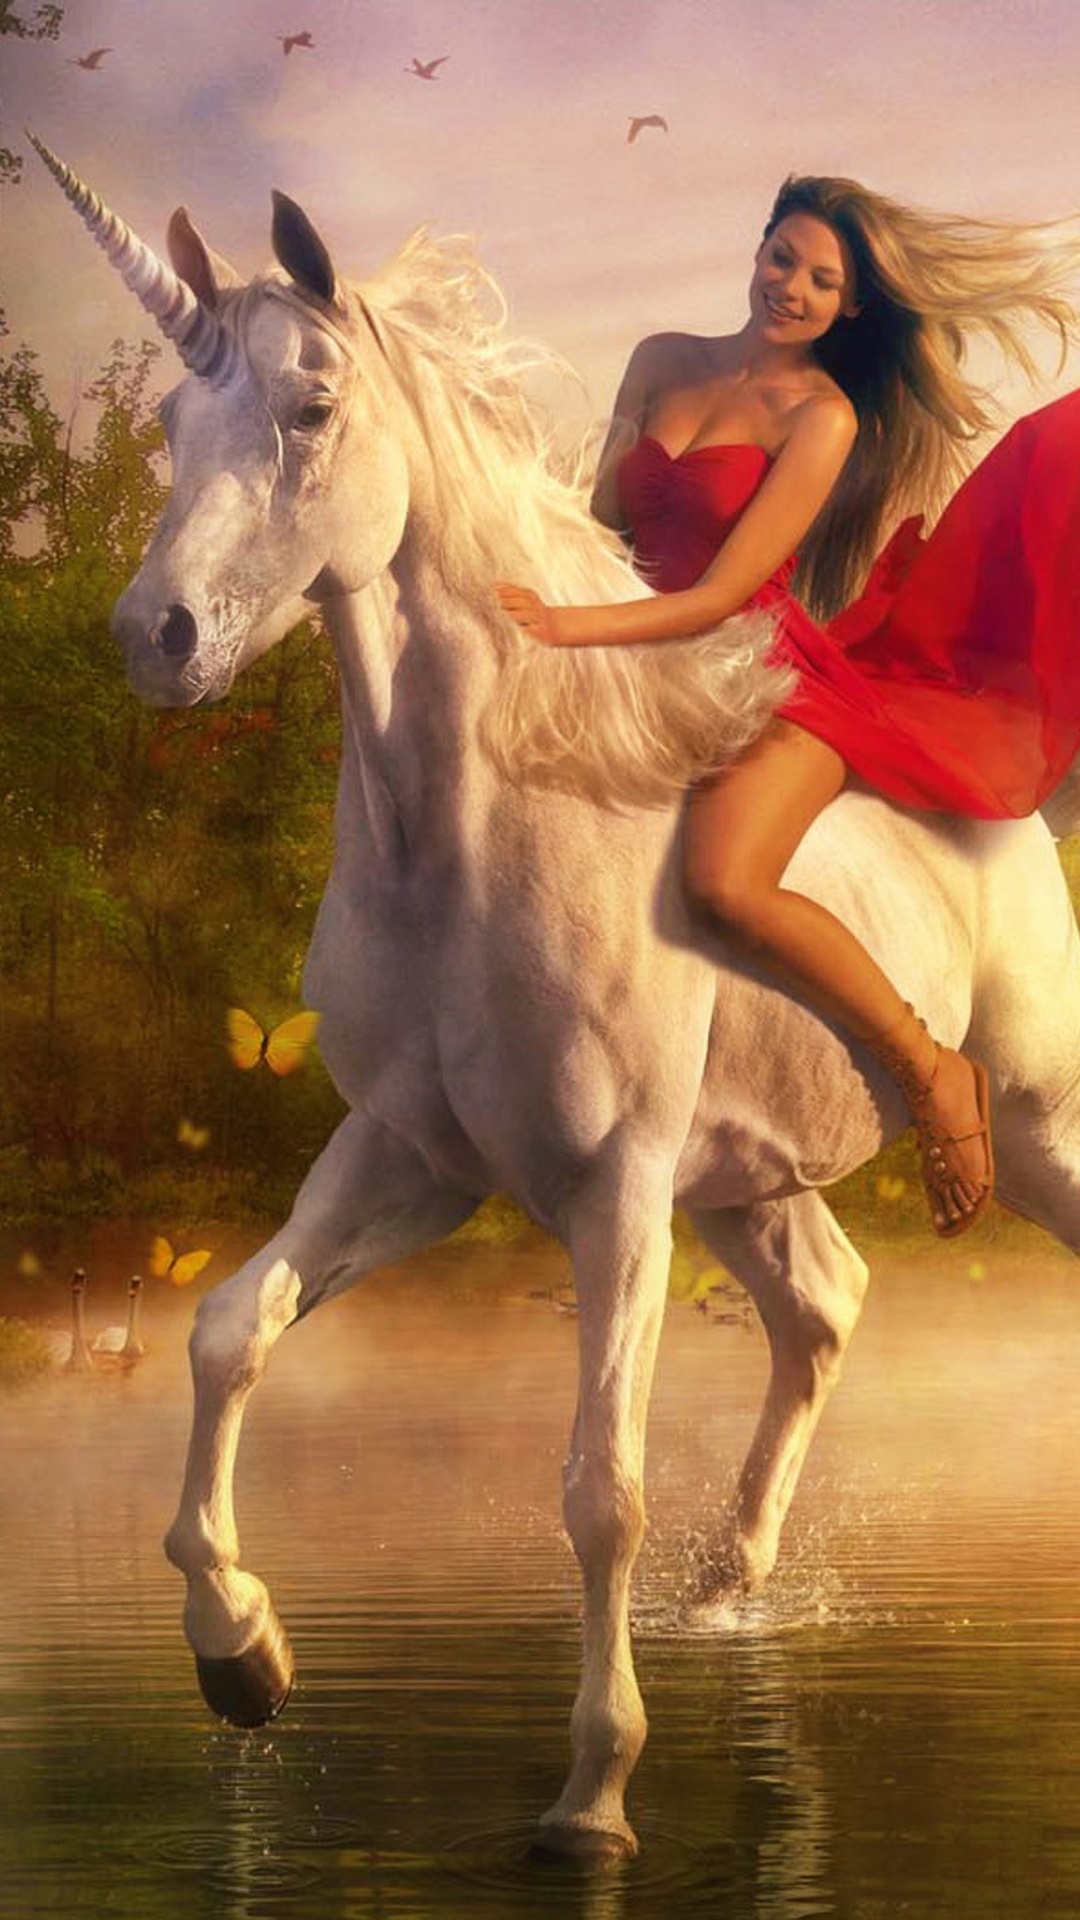 Woman in Red Dress Riding White Horse on Water. Wallpaper in 1080x1920 Resolution